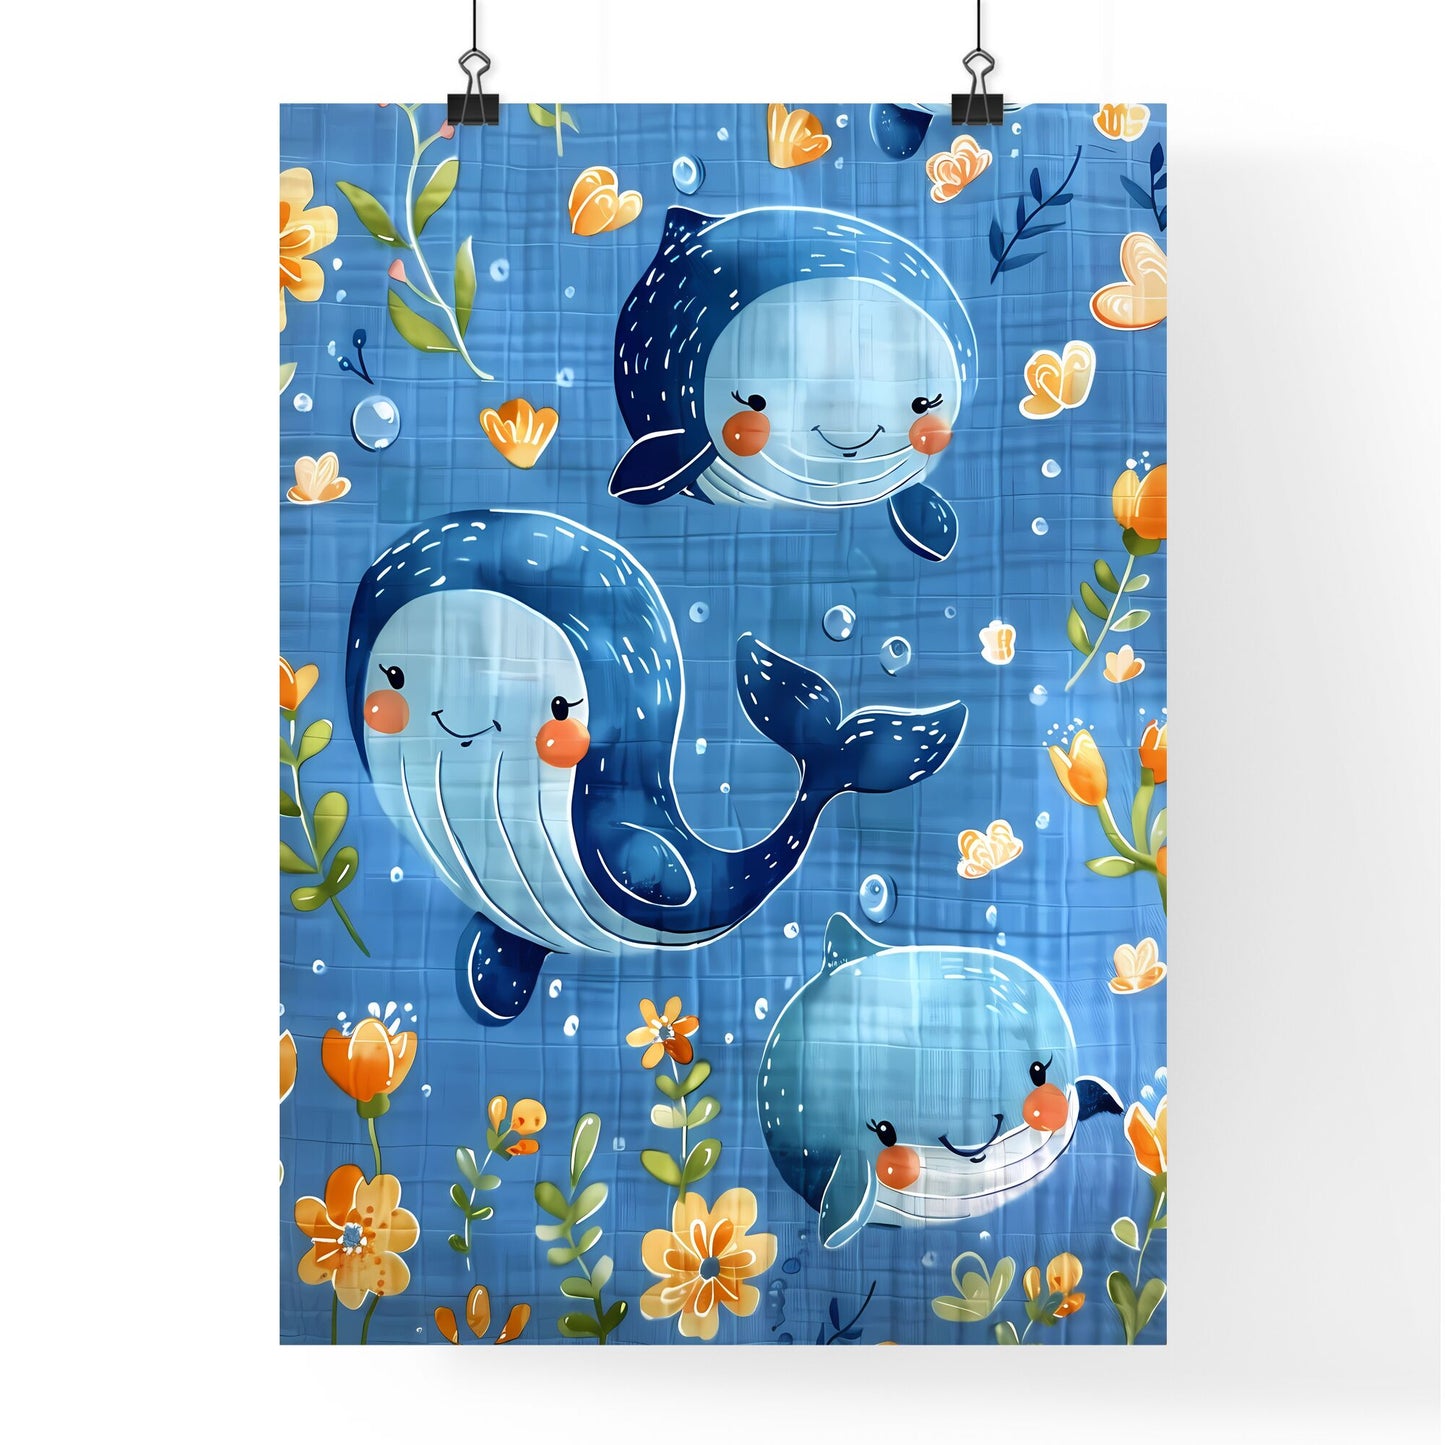 Artistic Ocean Nursery Fabric Pattern with Octopus and Whale Motifs in Blue and White Default Title